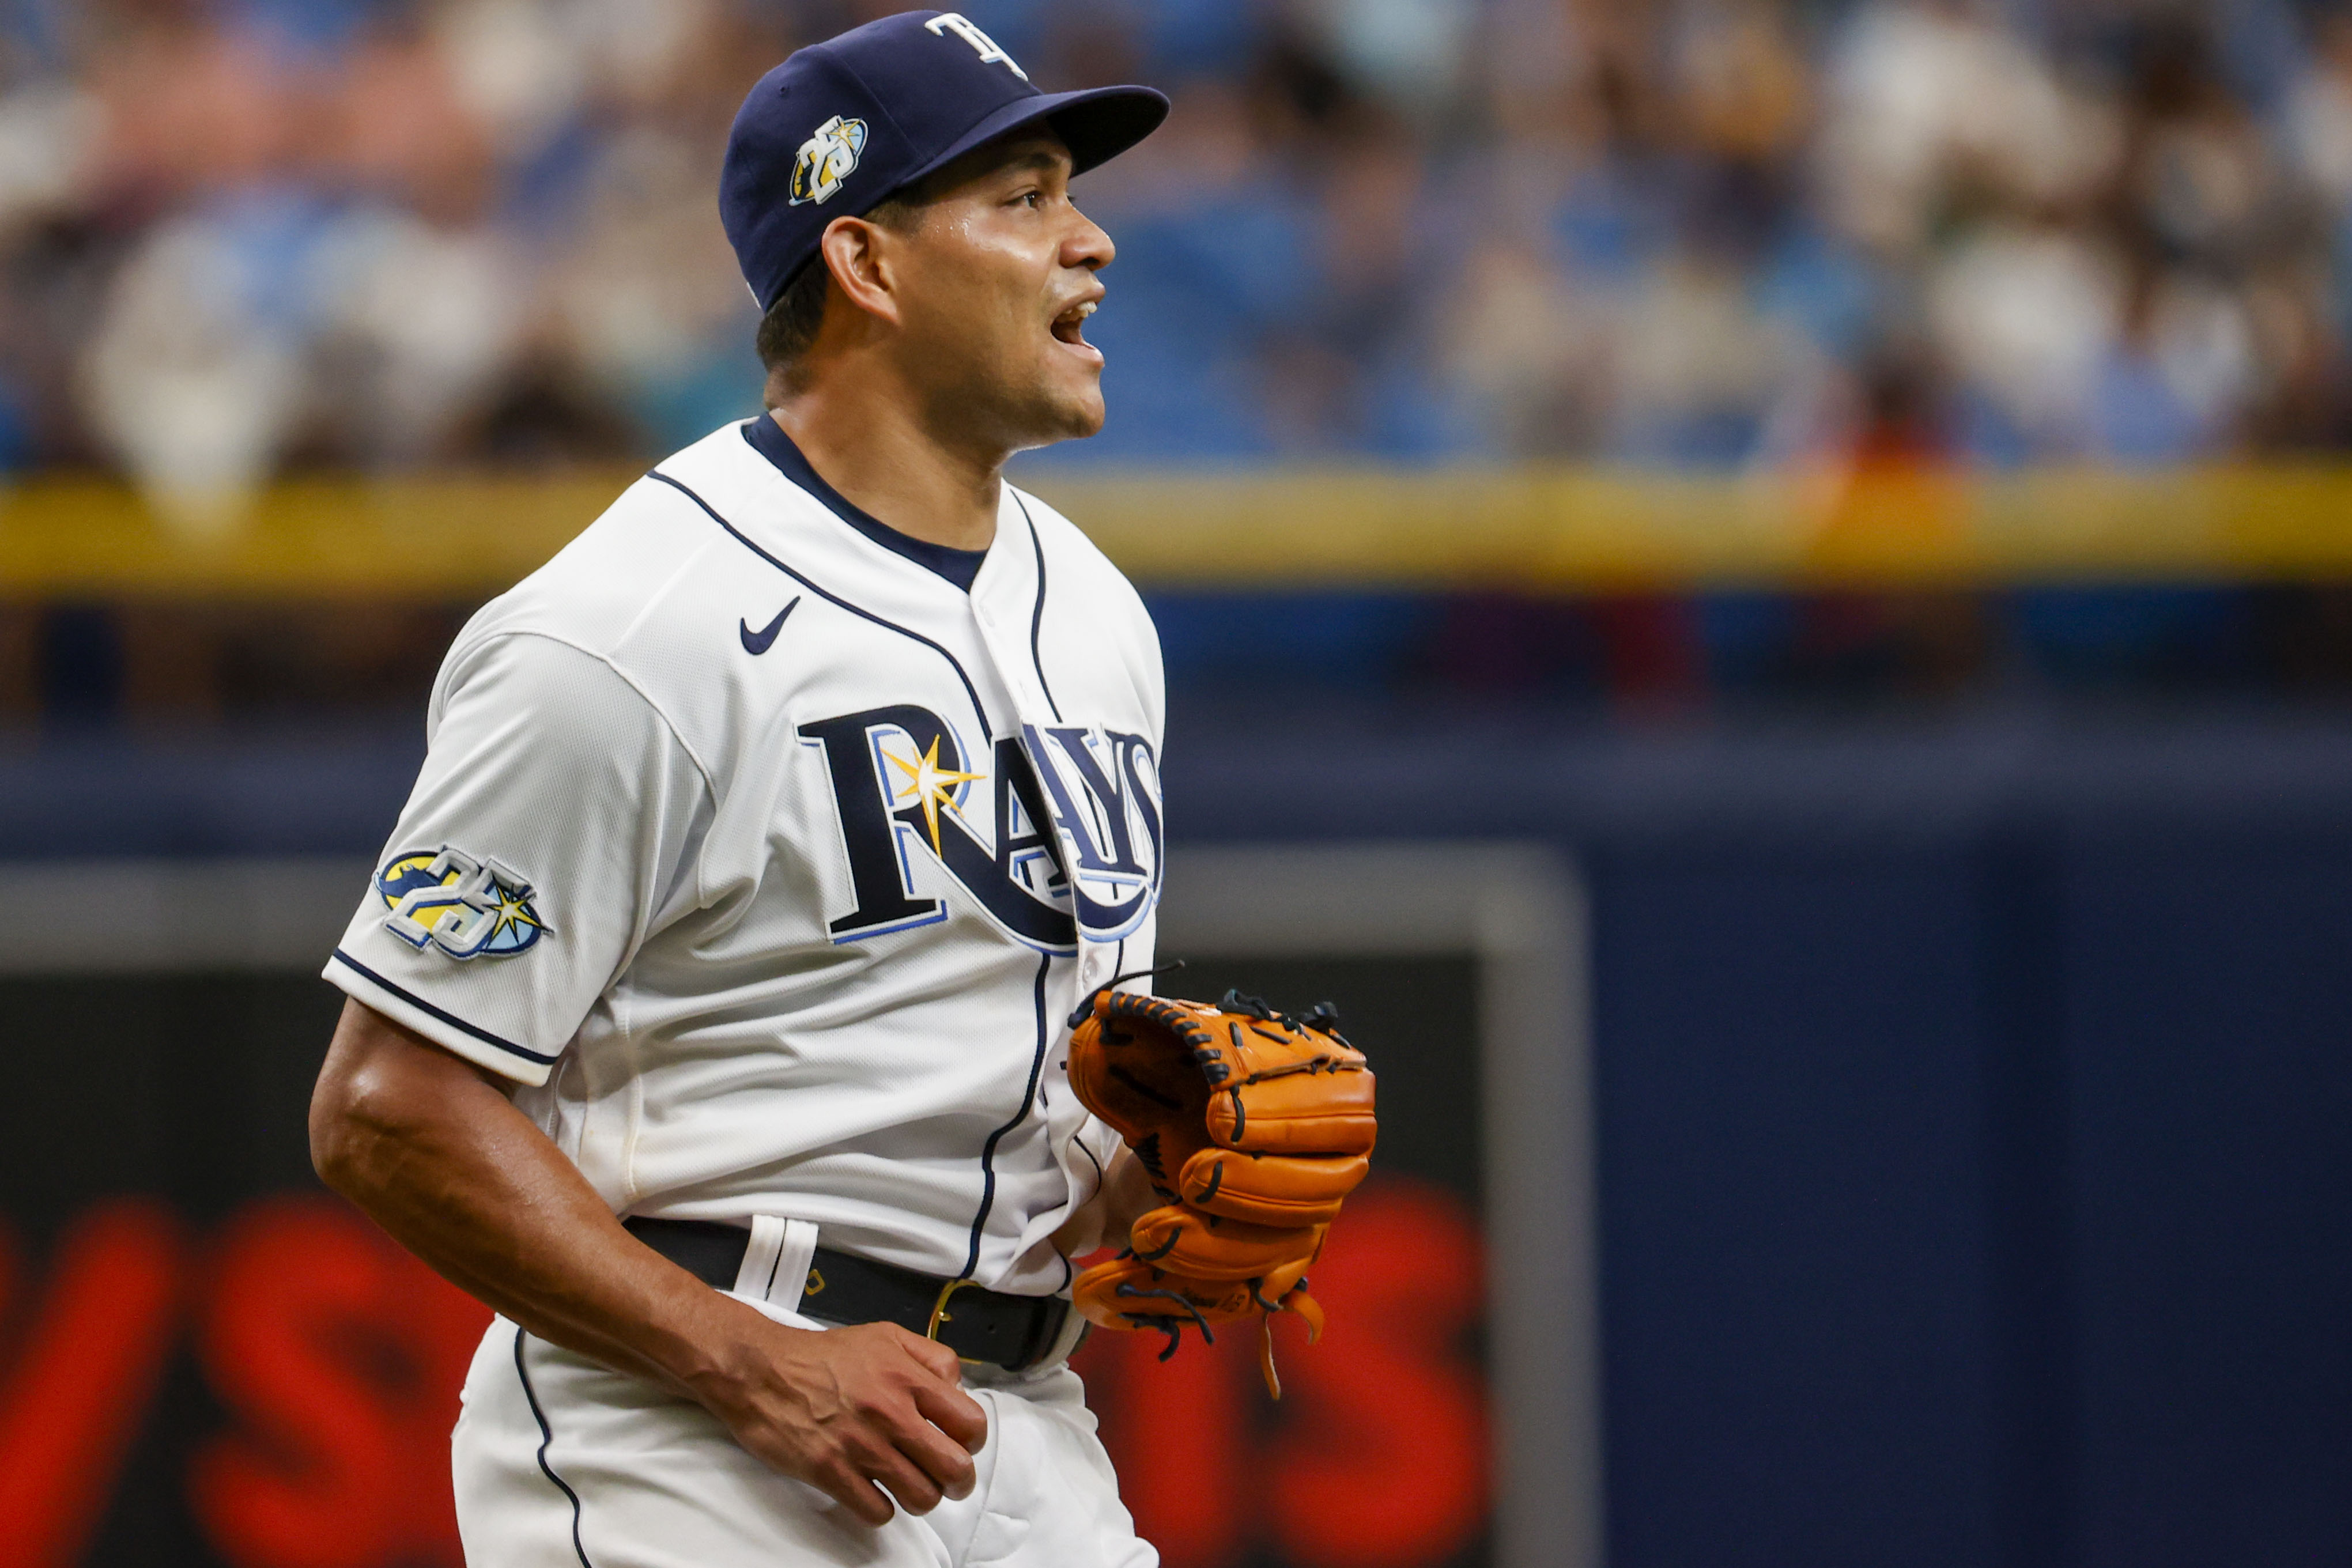 For starters: Rays aiming for sixth straight series win to open